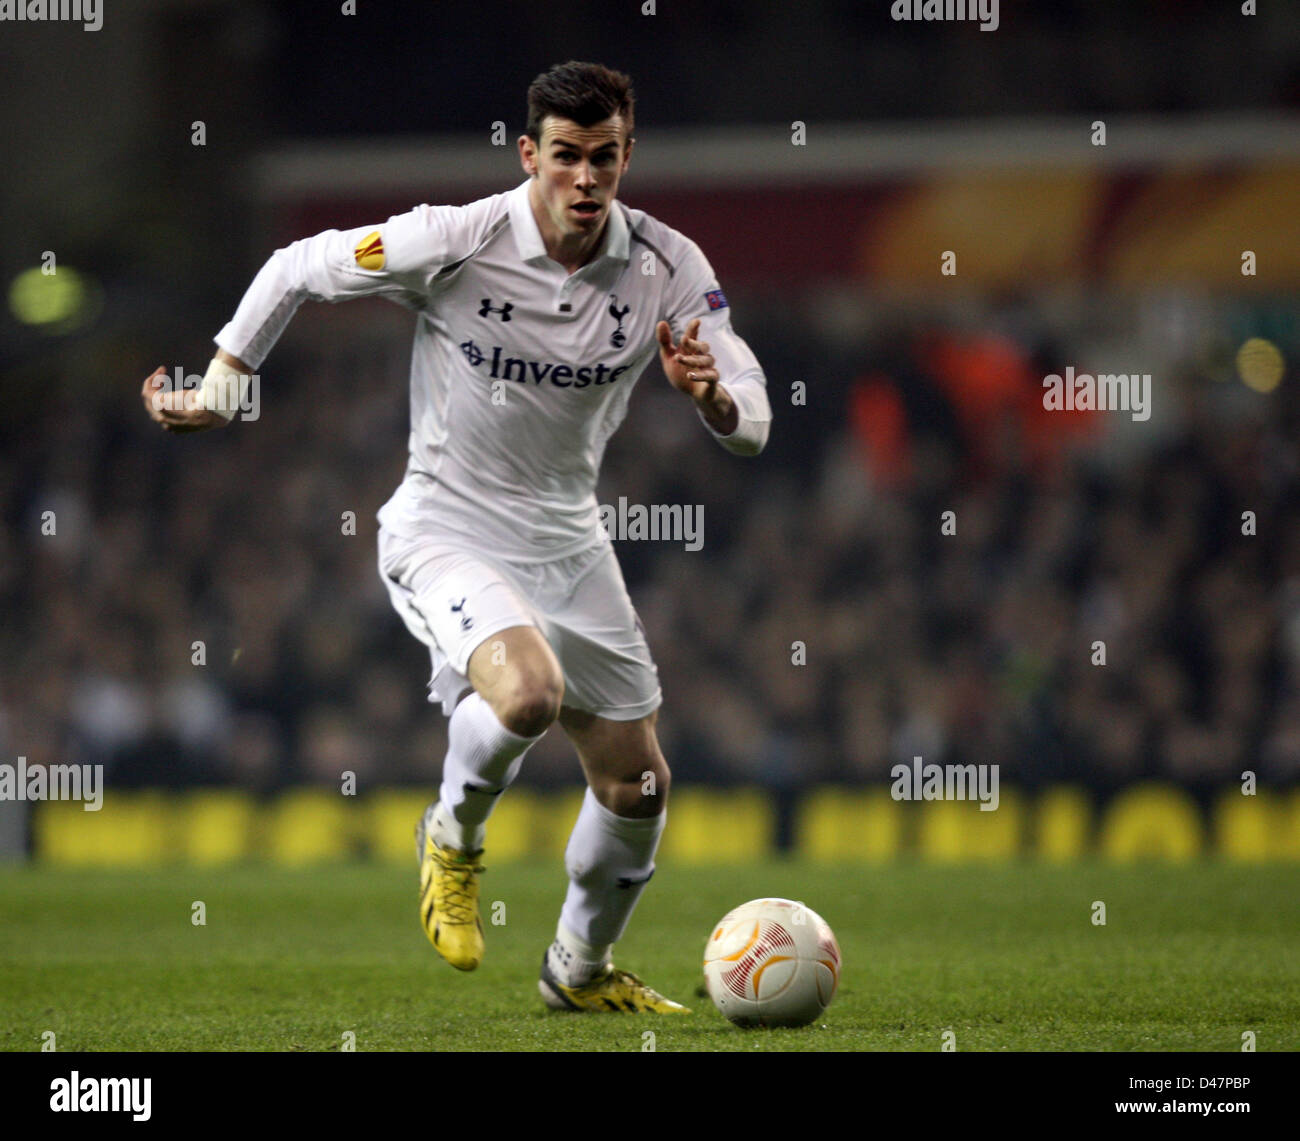 07.03.2013 London, England. Gareth Bale of Tottenham Hotspur during  the Europa League game between Tottenham Hotspur and Inter Milan from White Hart Lane. Stock Photo